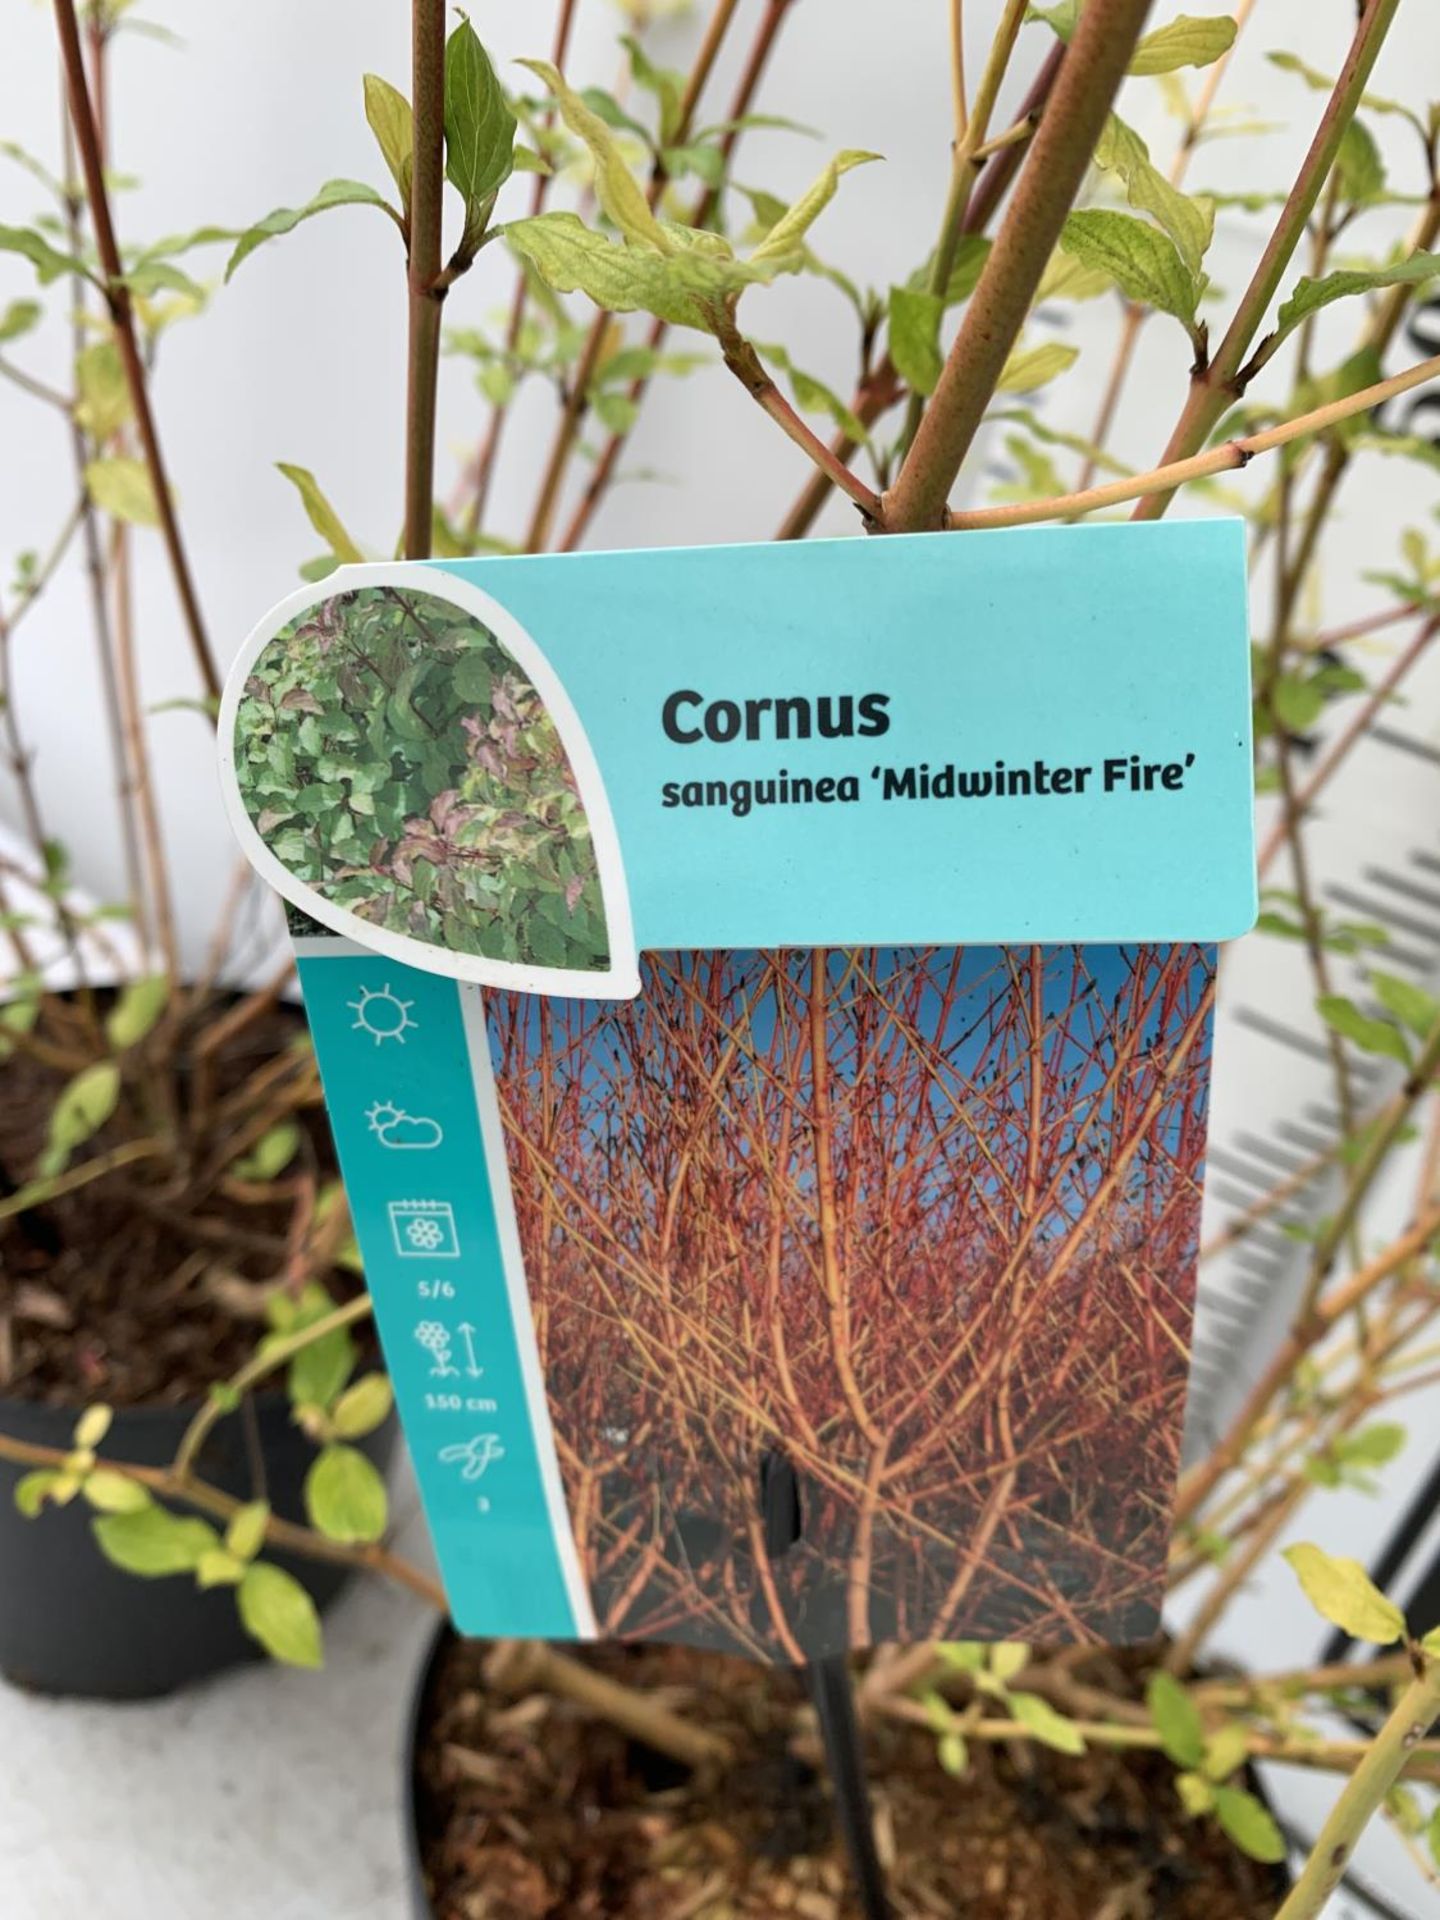 TWO CORNUS SANGUINEA 'MIDWINTER FIRE' IN 4 LTR POTS APPROX 90CM IN HEIGHT PLUS VAT TO BE SOLD FOR - Image 5 of 6